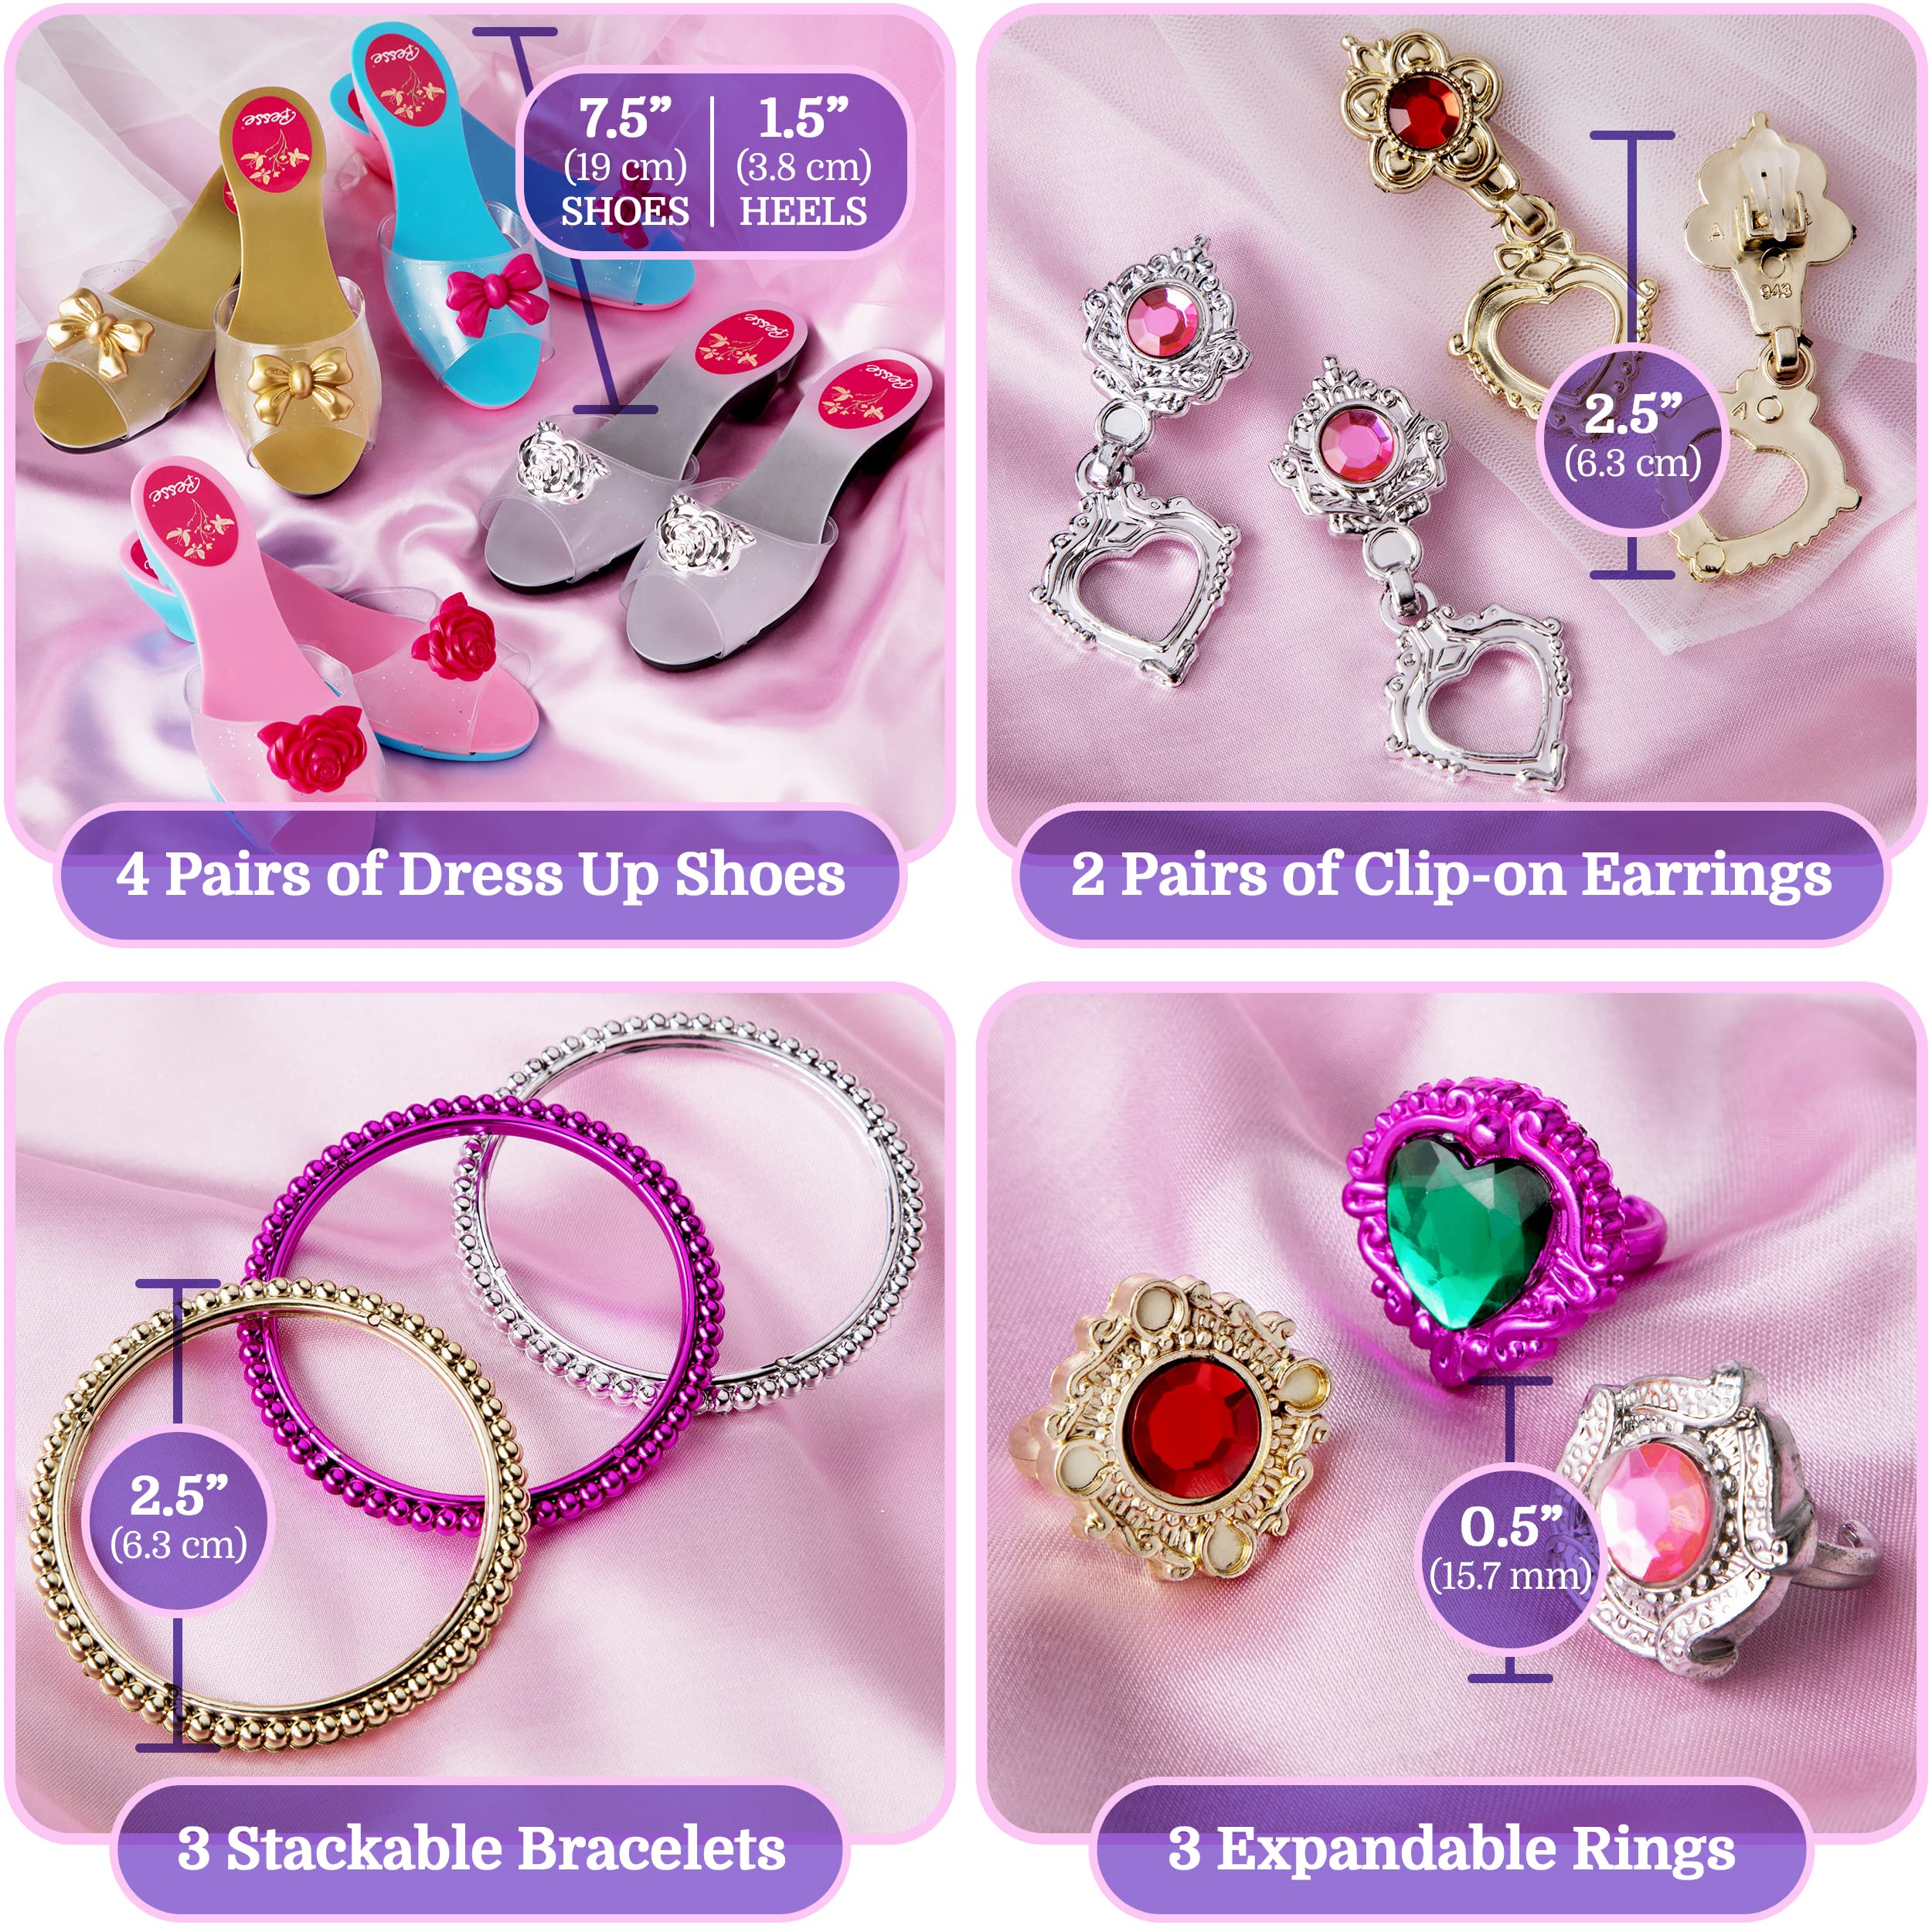 Princess Dress Up Shoes and Jewelry for Little Girls | Toddler Pretend Play Boutique Set | 4 Pairs of Shoes, Earrings, Bracelets & Rings | Gift Toy Set for 2 3 4 5 6 Year Old Girl | Gifts for Girls